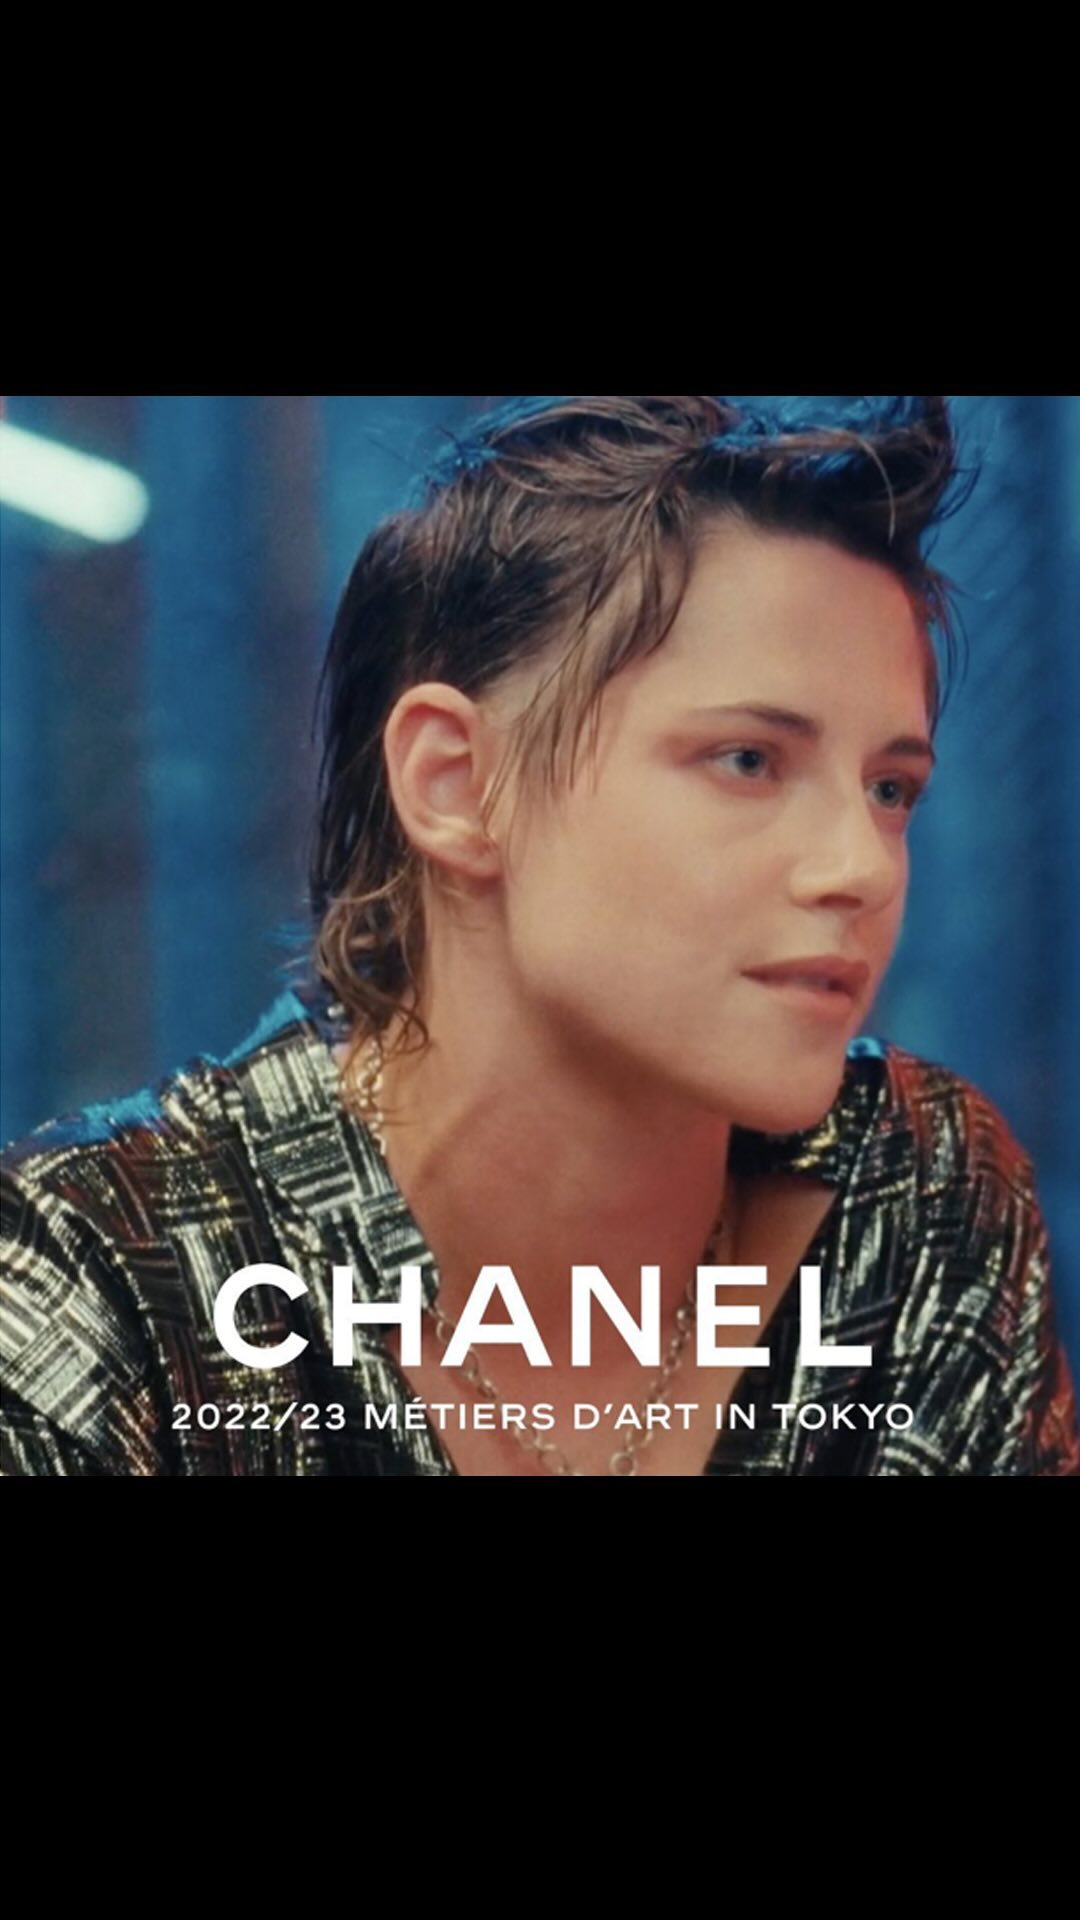 CHANEL 2022/23 Métiers d’art replica show in Tokyo”⁣⁣⁣⁣
⁣⁣⁣
We are honored to be the service company behind the grandeur of CHANEL’s latest show in Tokyo.

Production Company: Walter Films
Director: Caroline de Maigret, Philippe Prouff
Producer : Simon Arias, Asako Furukata
Service Company: AOI Pro.